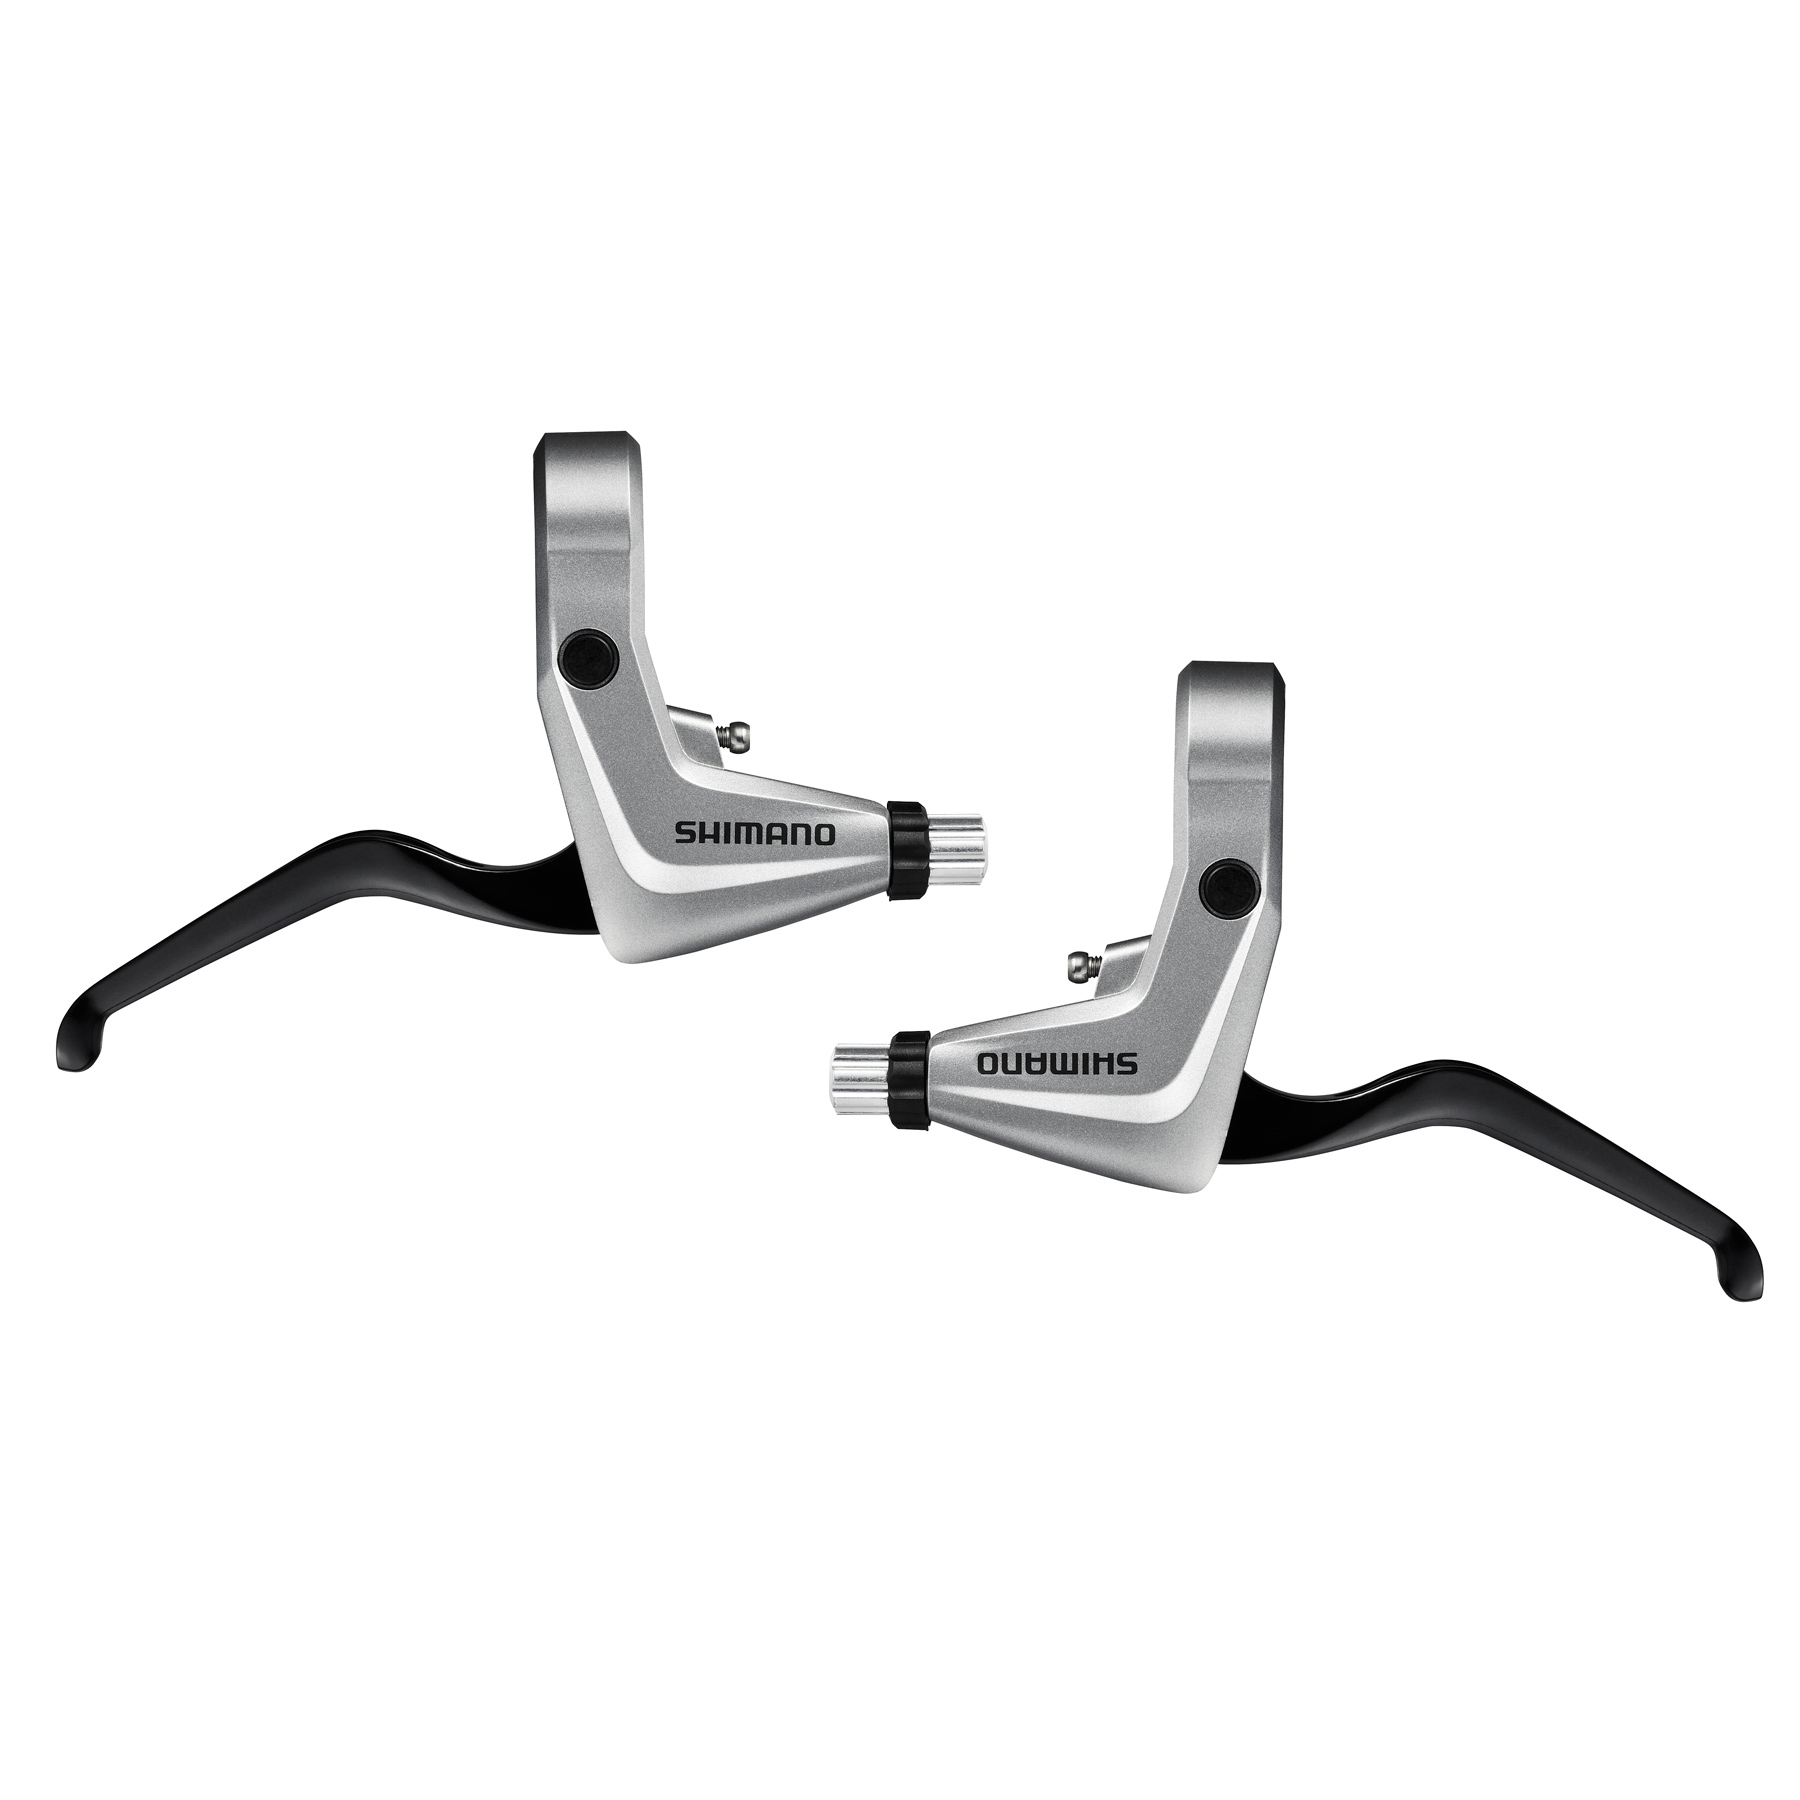 Image of Shimano BL-T4010 Brake Levers (pair) - silver